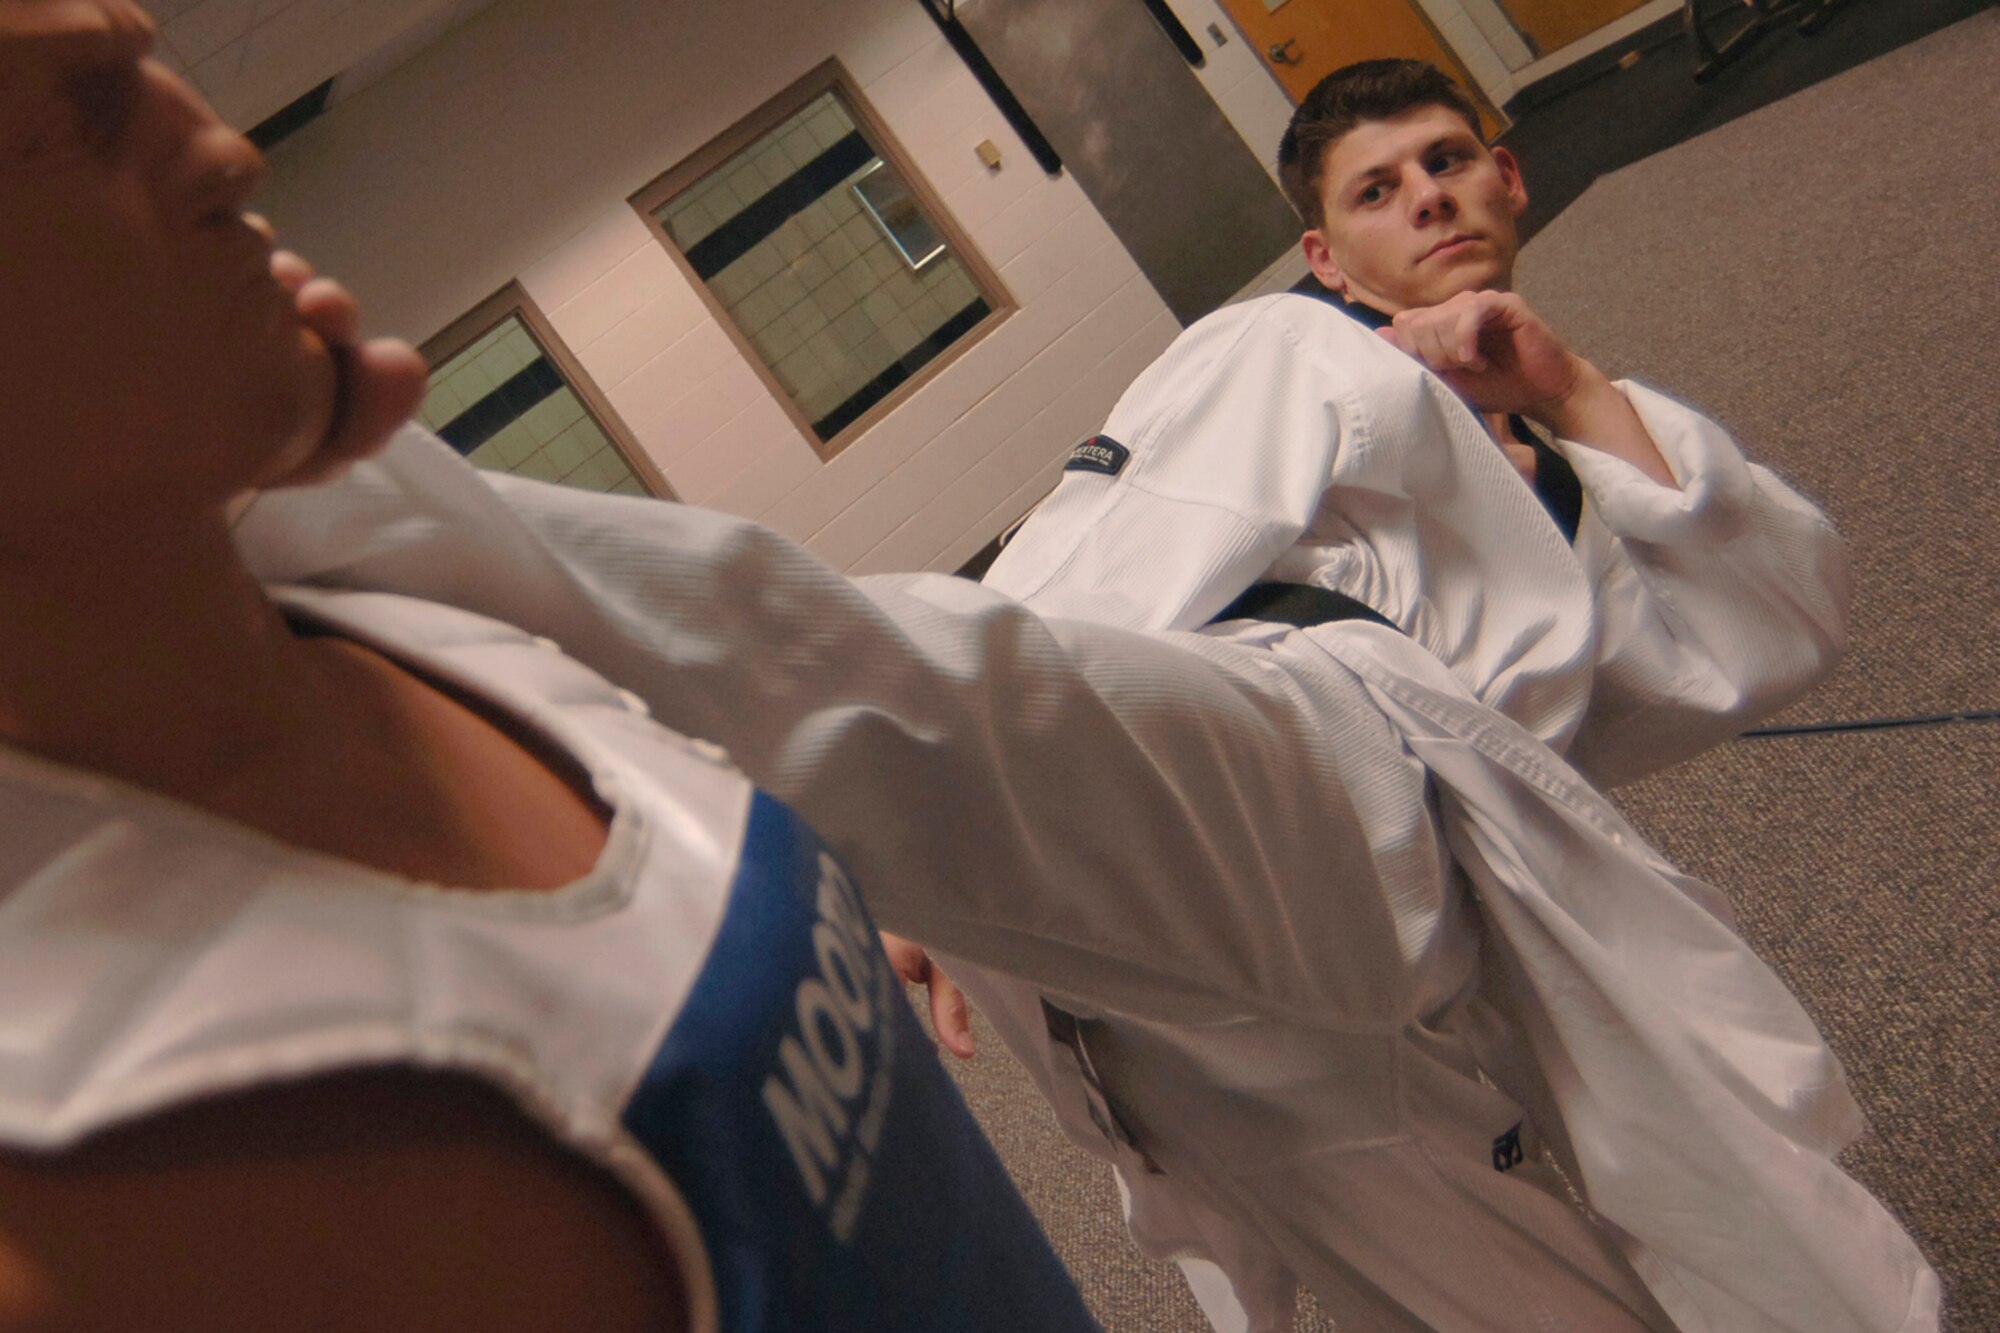 MCCONNELL AIR FORCE BASE, Kan. -- Airman 1st Class Jonathan Scherquist, 22nd Force Support Squadron, sidekicks a dummy component during a taekwondo training session, at the base fitness center, July 17. (Photo by Airman 1st Class Maria Ruiz)